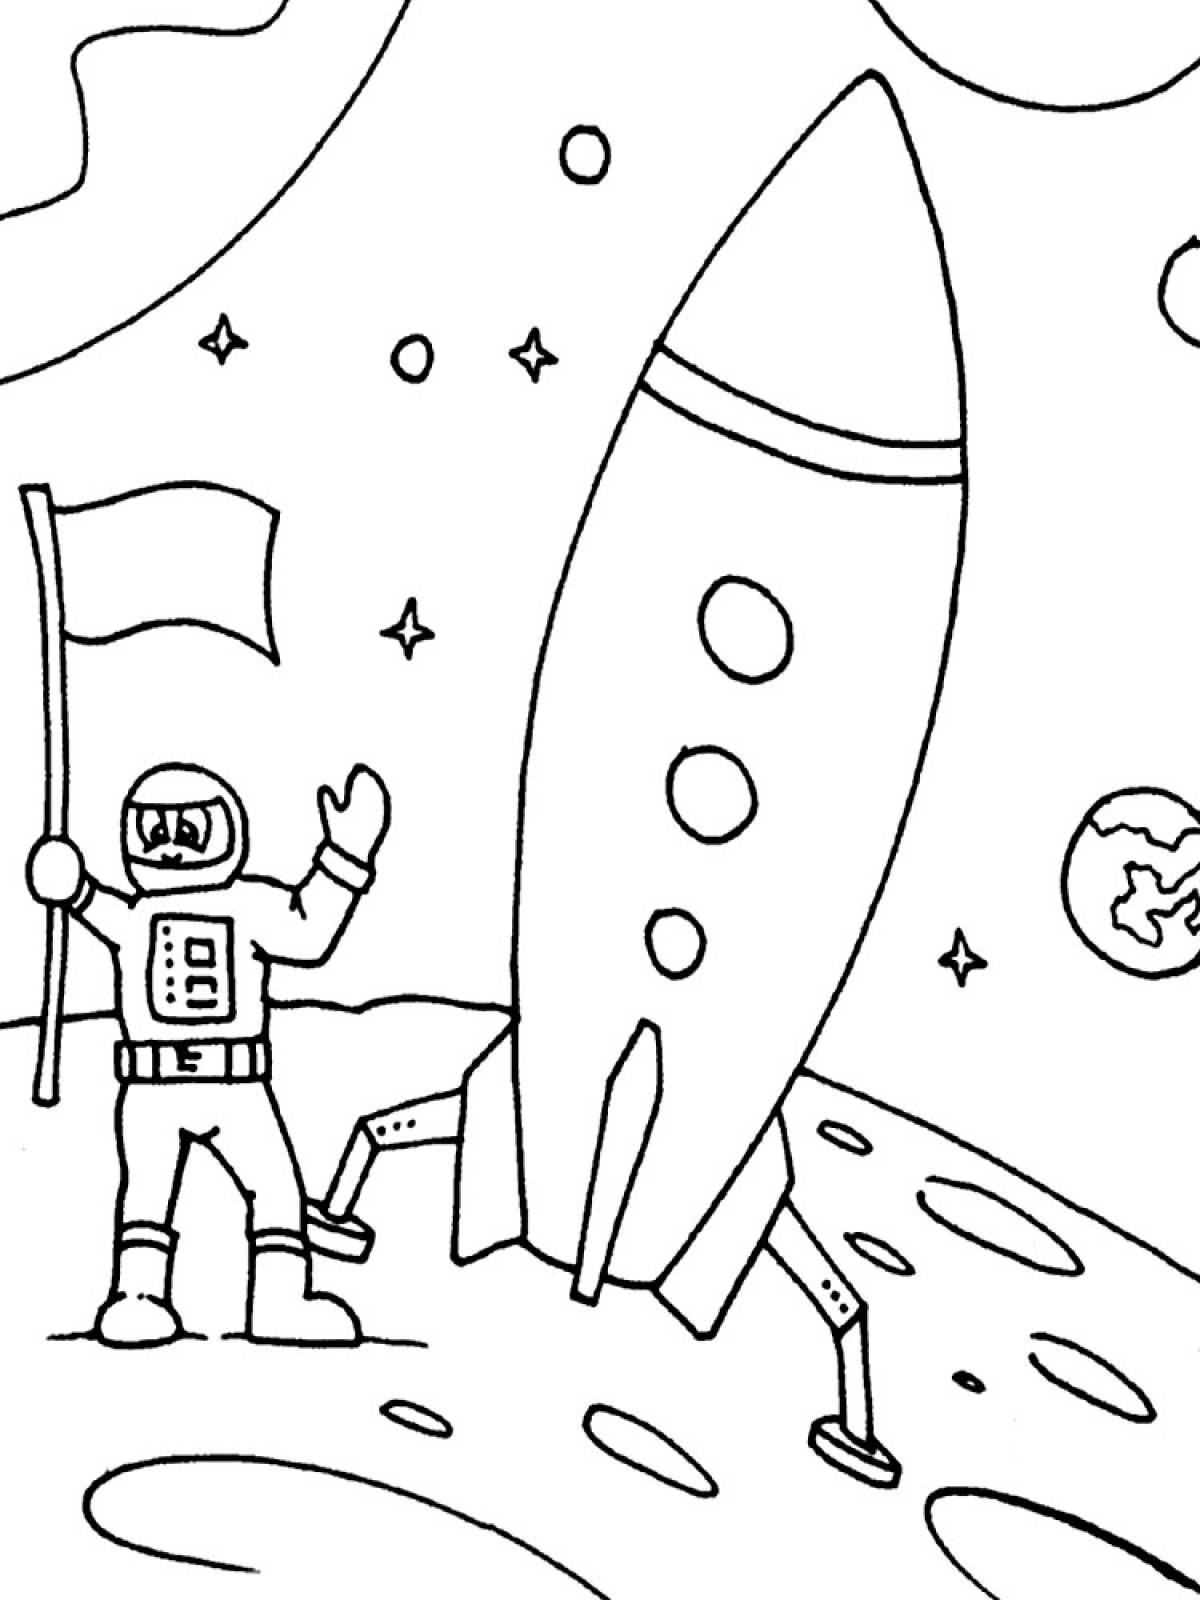 Astronaut with flag and rocket